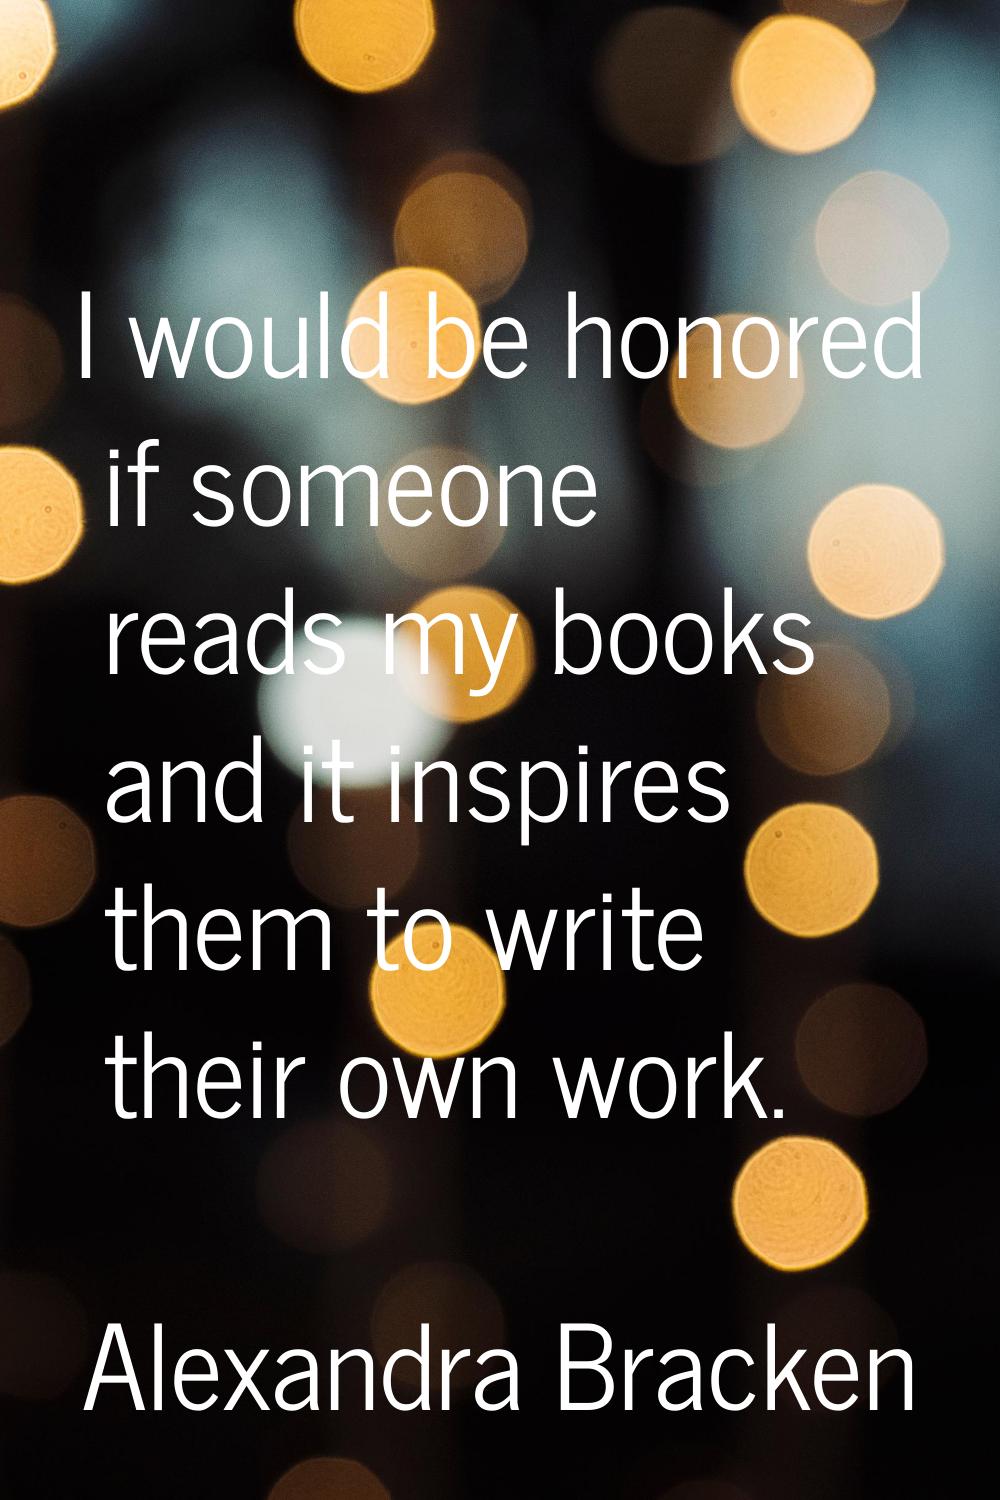 I would be honored if someone reads my books and it inspires them to write their own work.